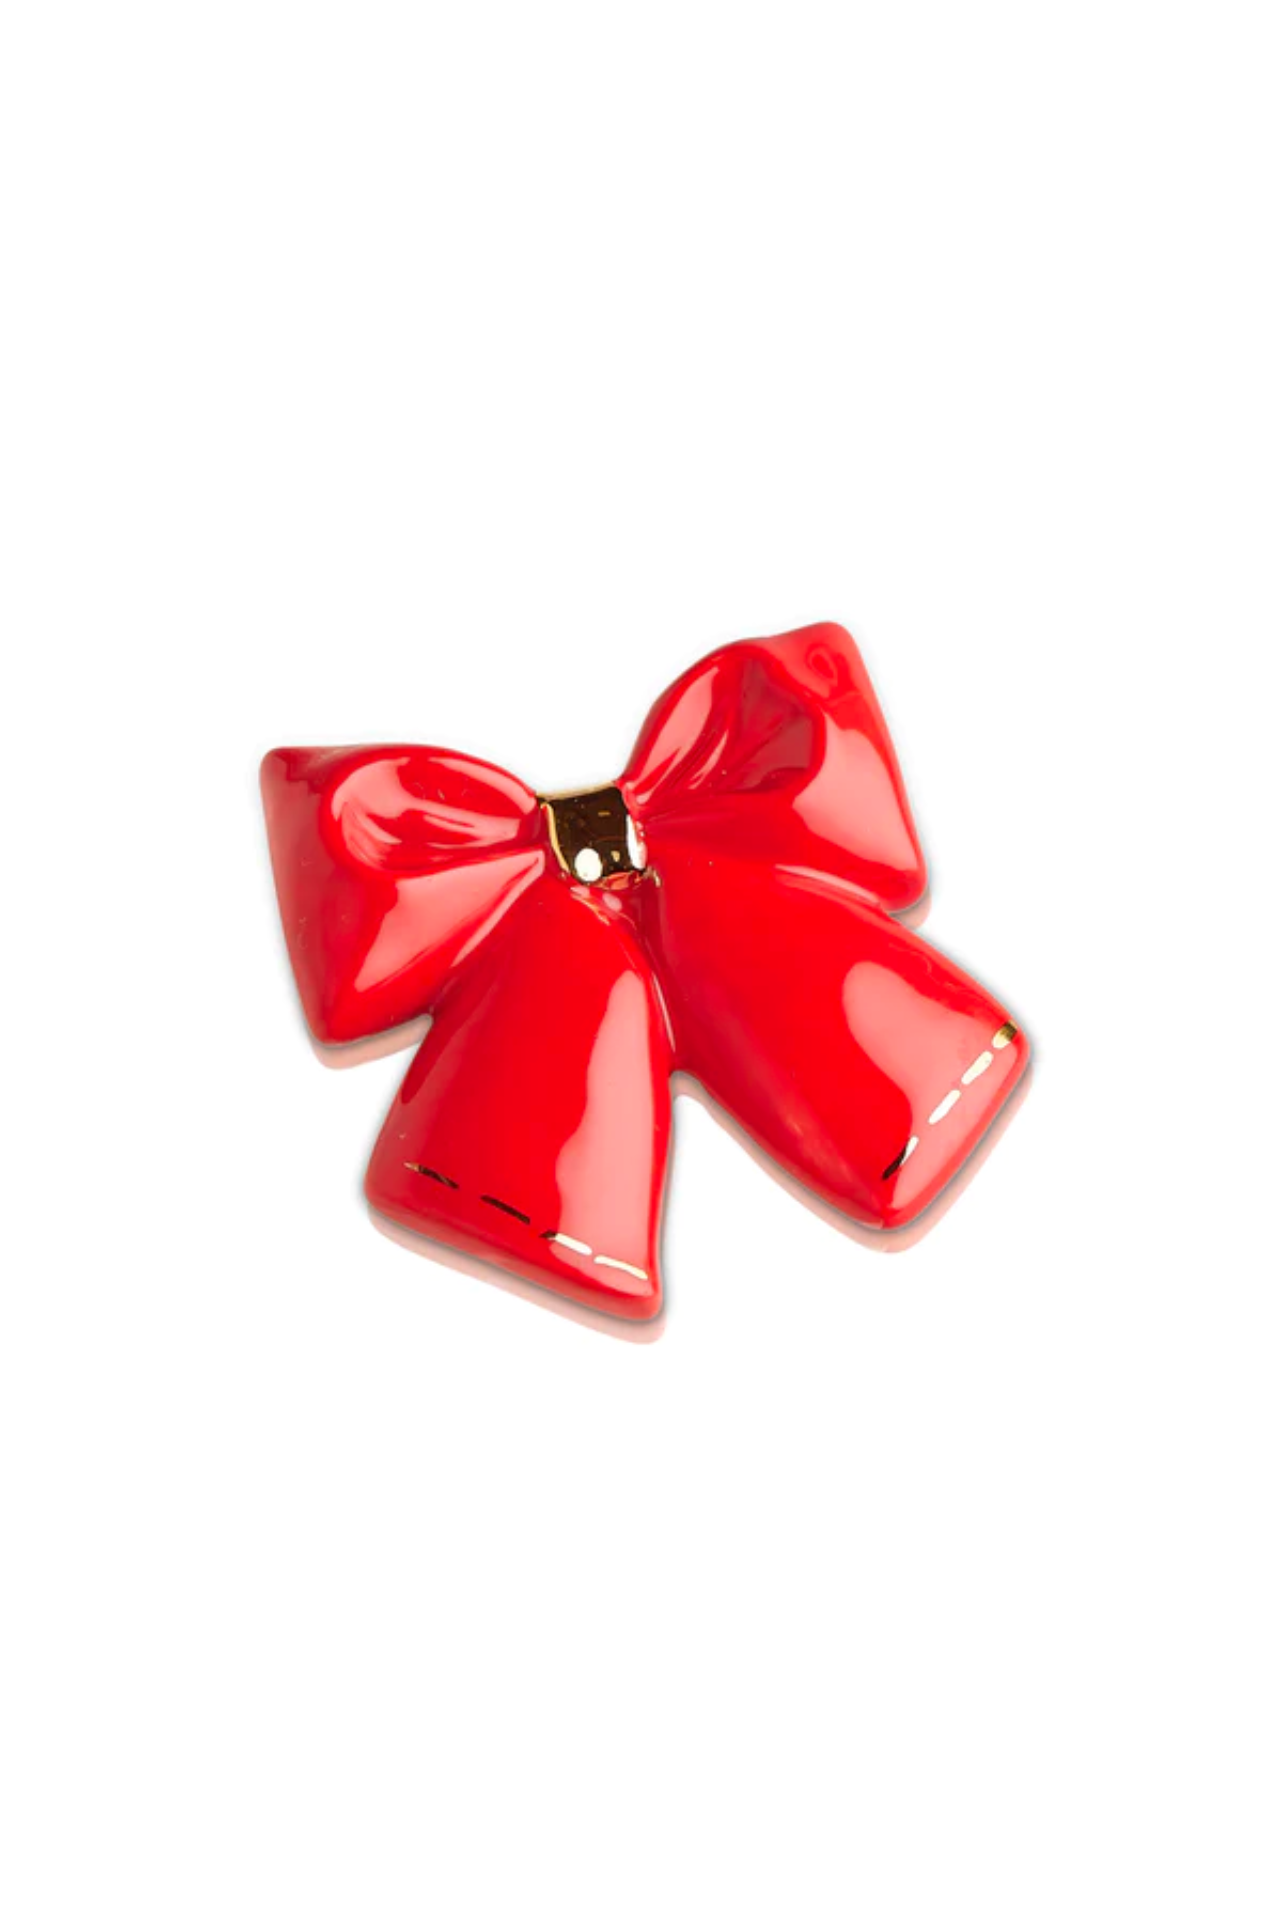 wrap it up (red bow) A238